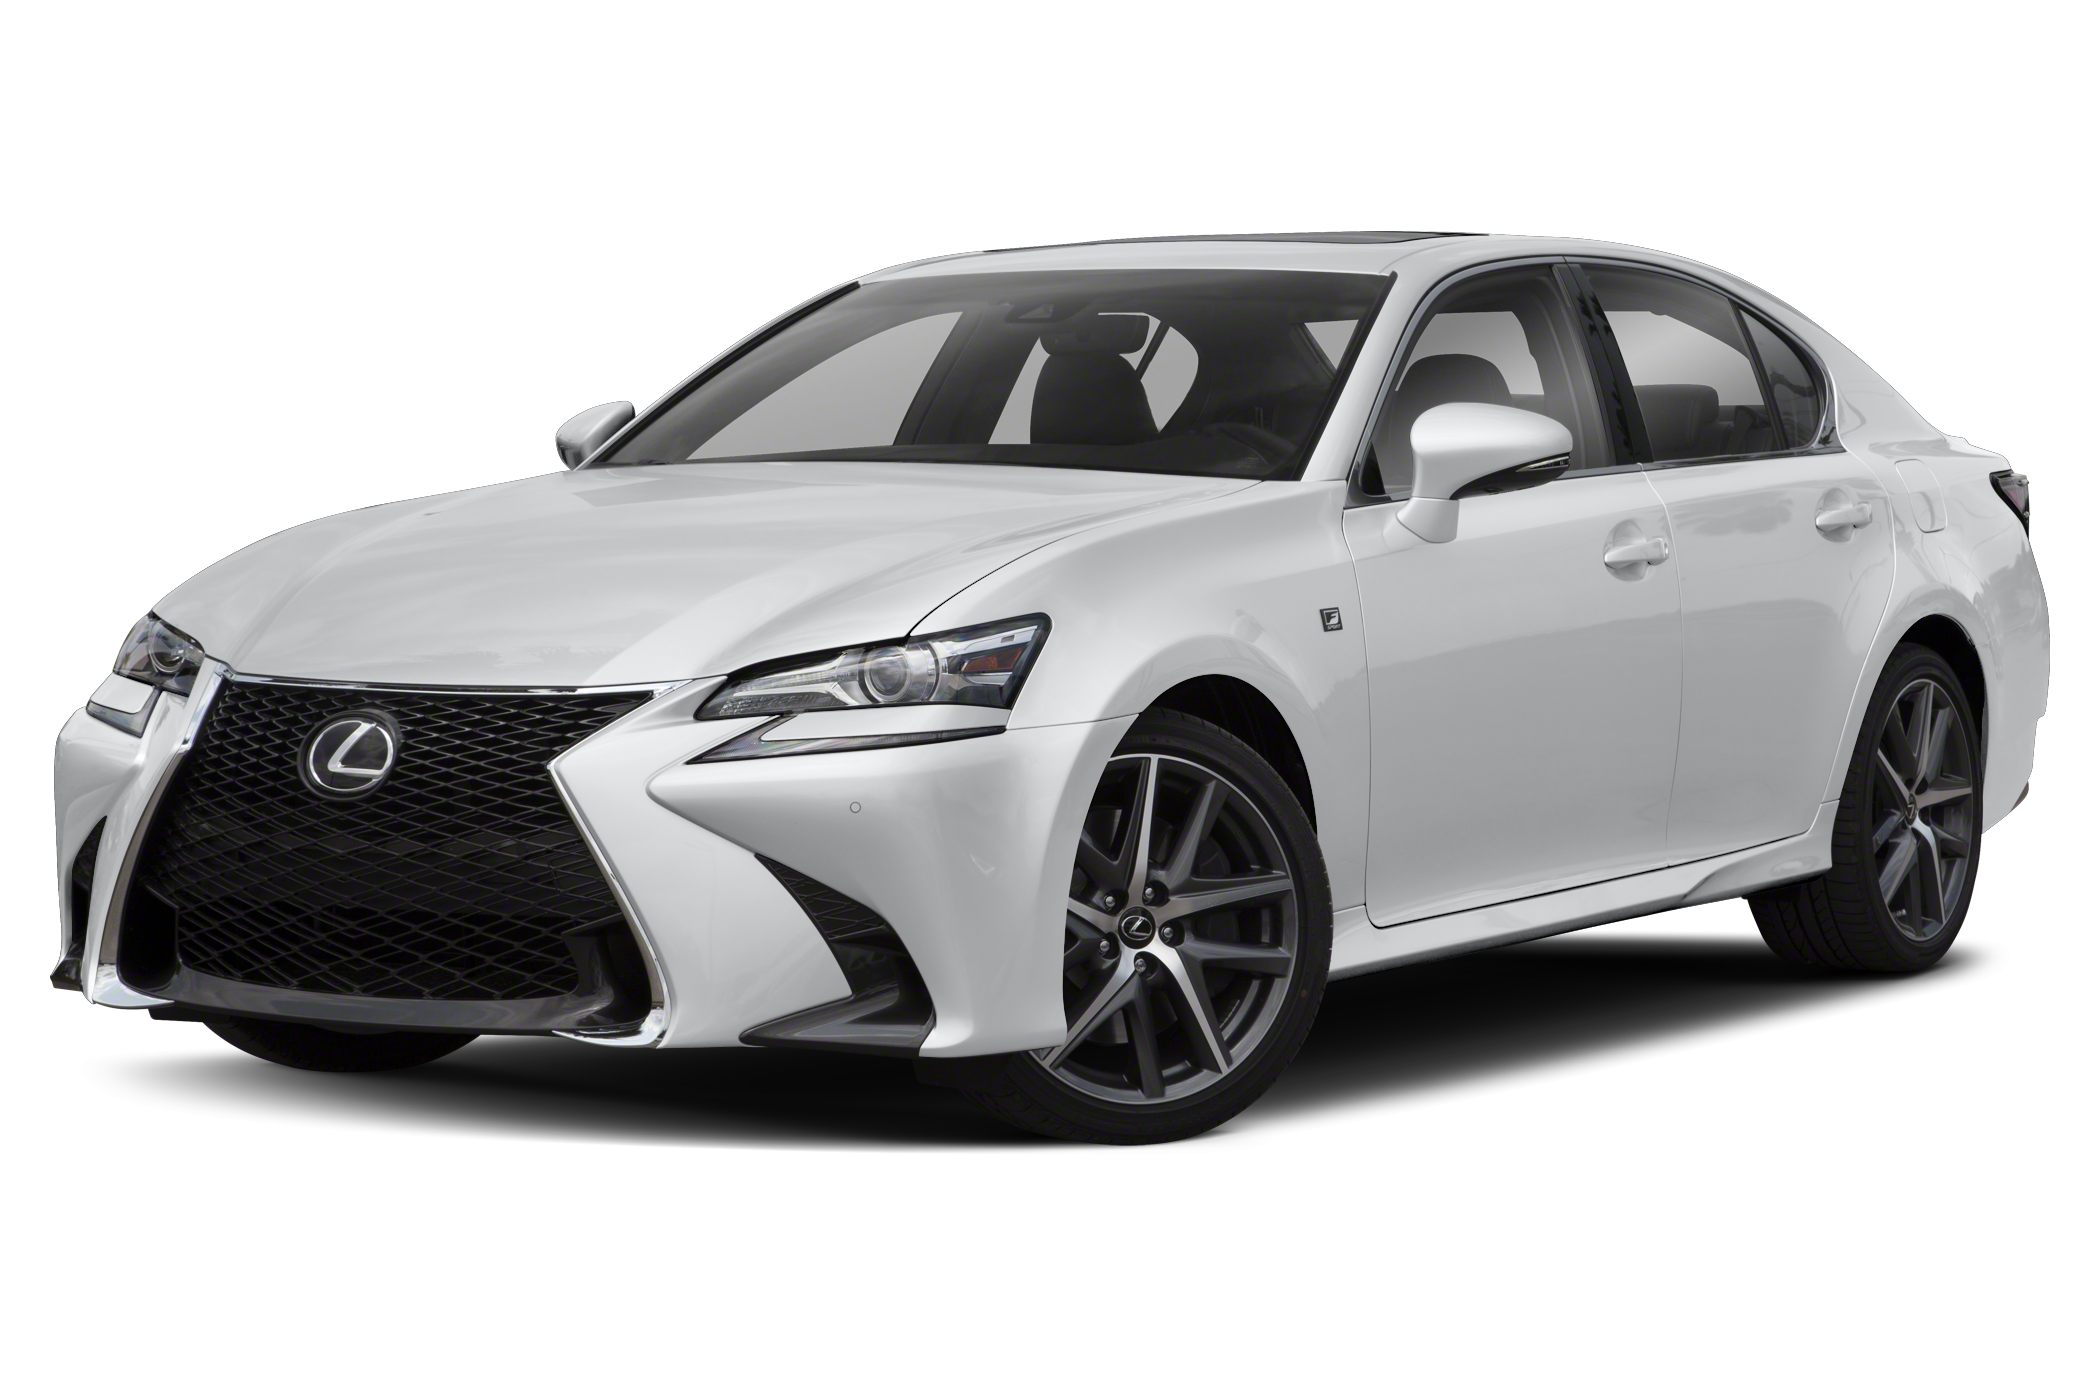 2018 Lexus Gs 350 F Sport 4dr All-wheel Drive Sedan Specs And Prices